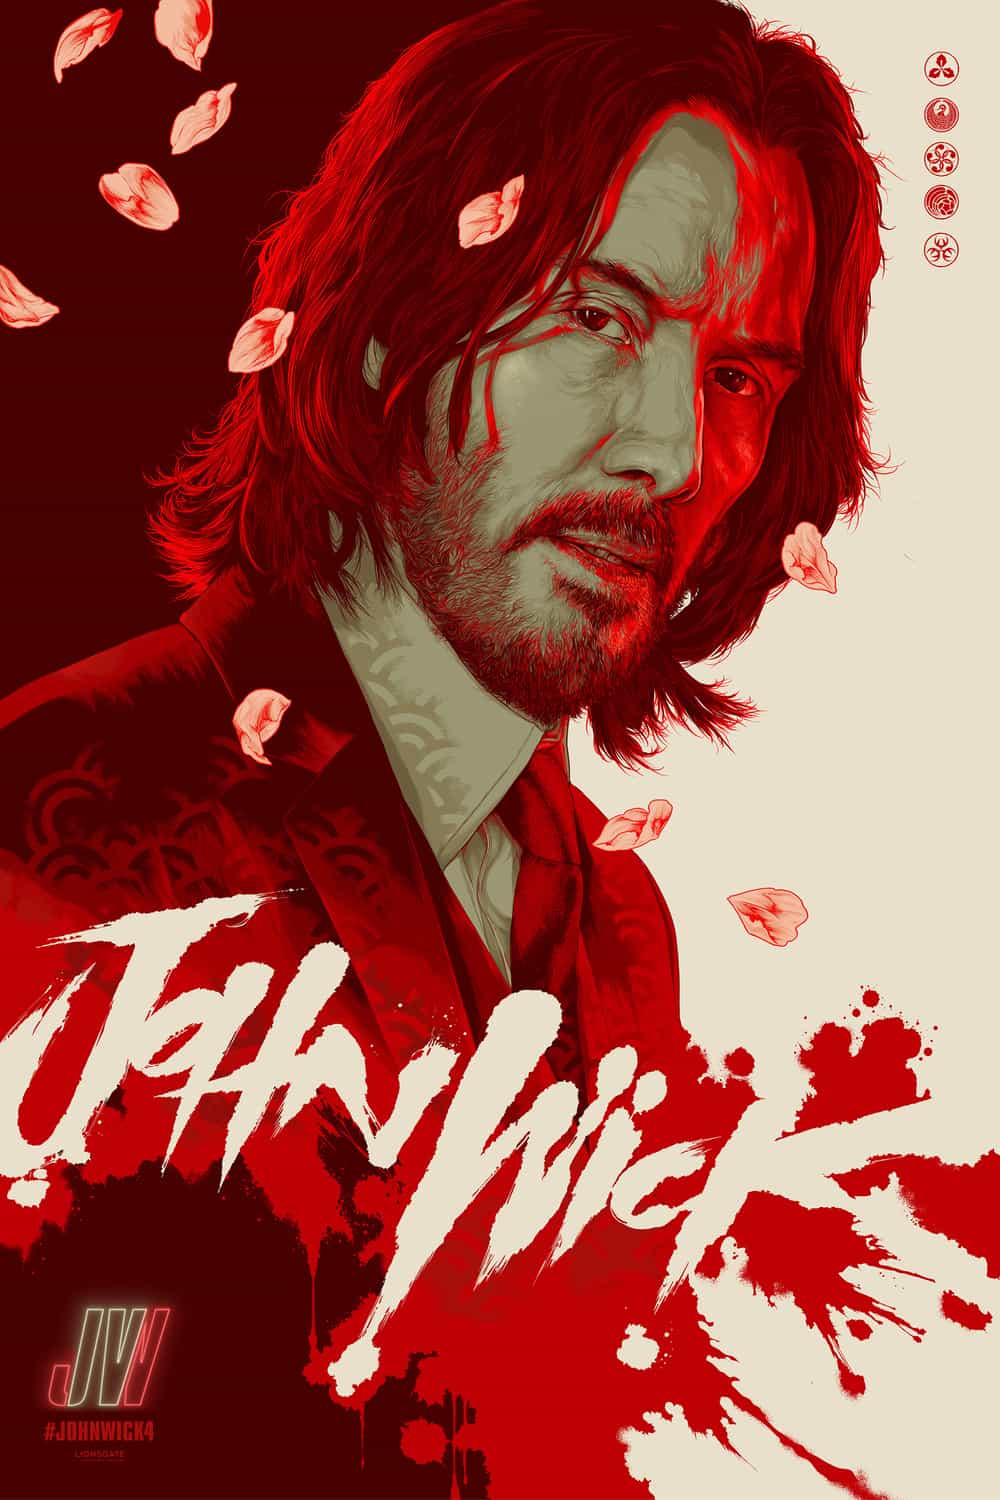 Global Box Office Weekend Report 24th - 26th March 2023:  John Wick 4 is the top new movie of the weekend making its debut at the top of the global box office